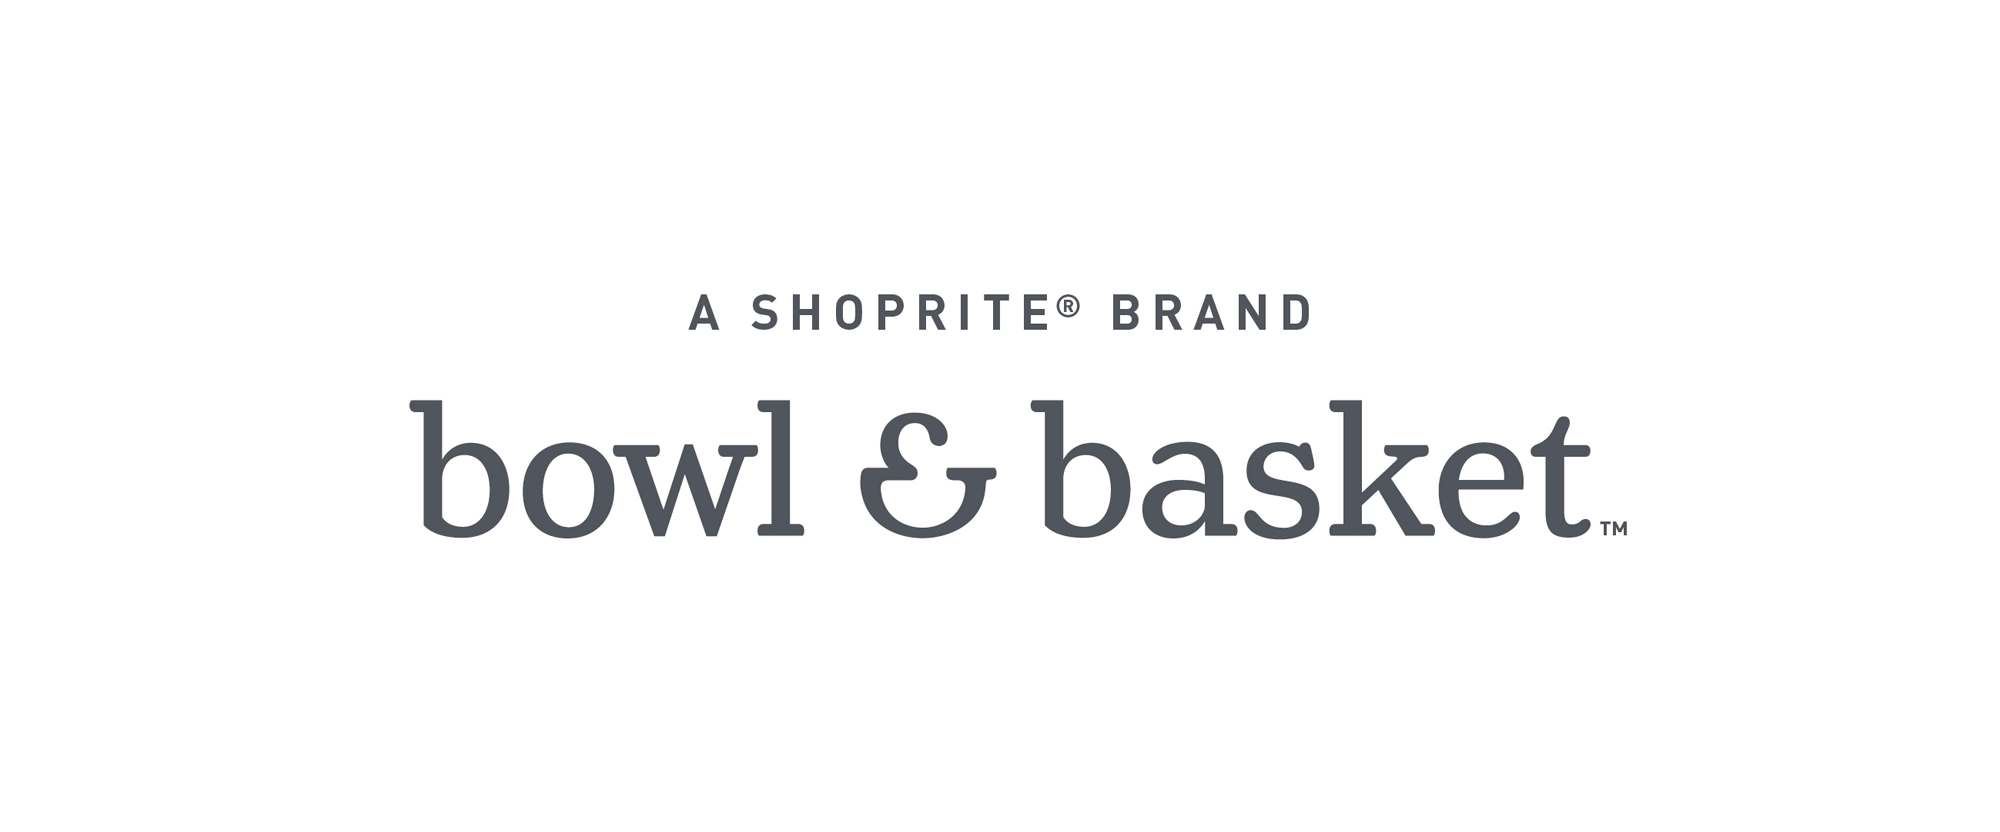 New Logo and Packaging for Bowl & Basket by Pearlfisher